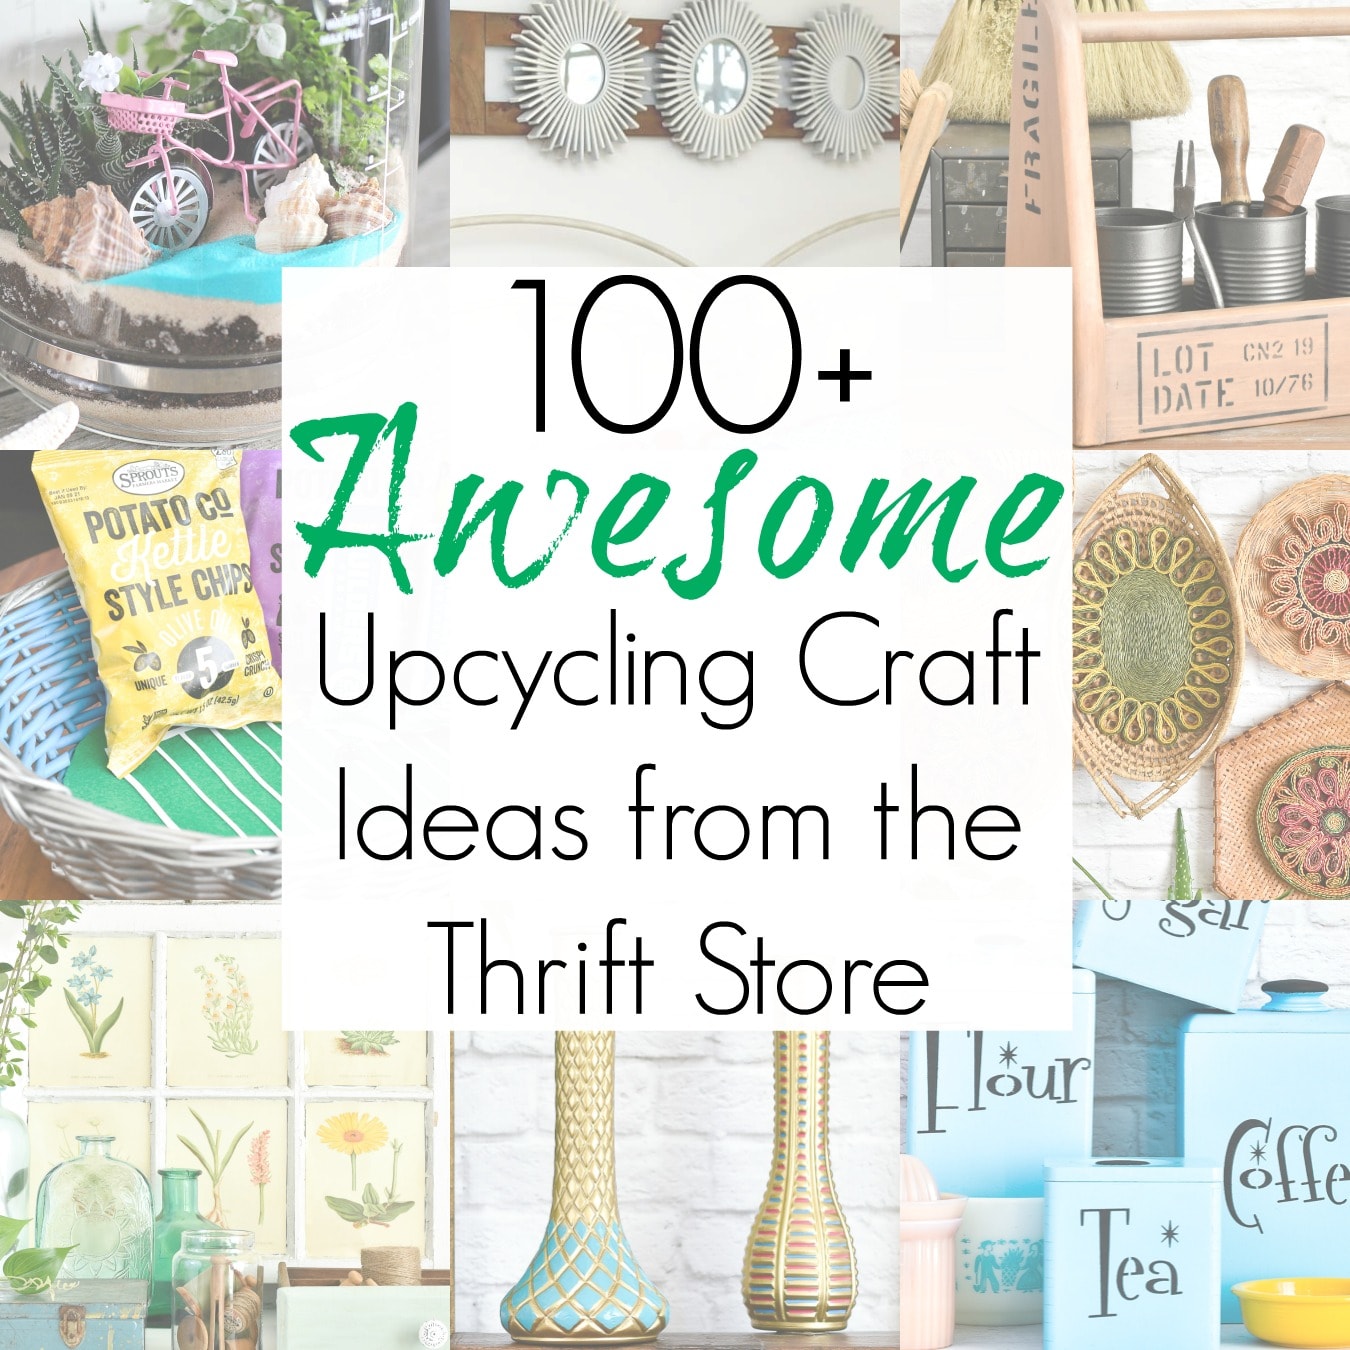 100+ Upcycling Craft Ideas in 2020